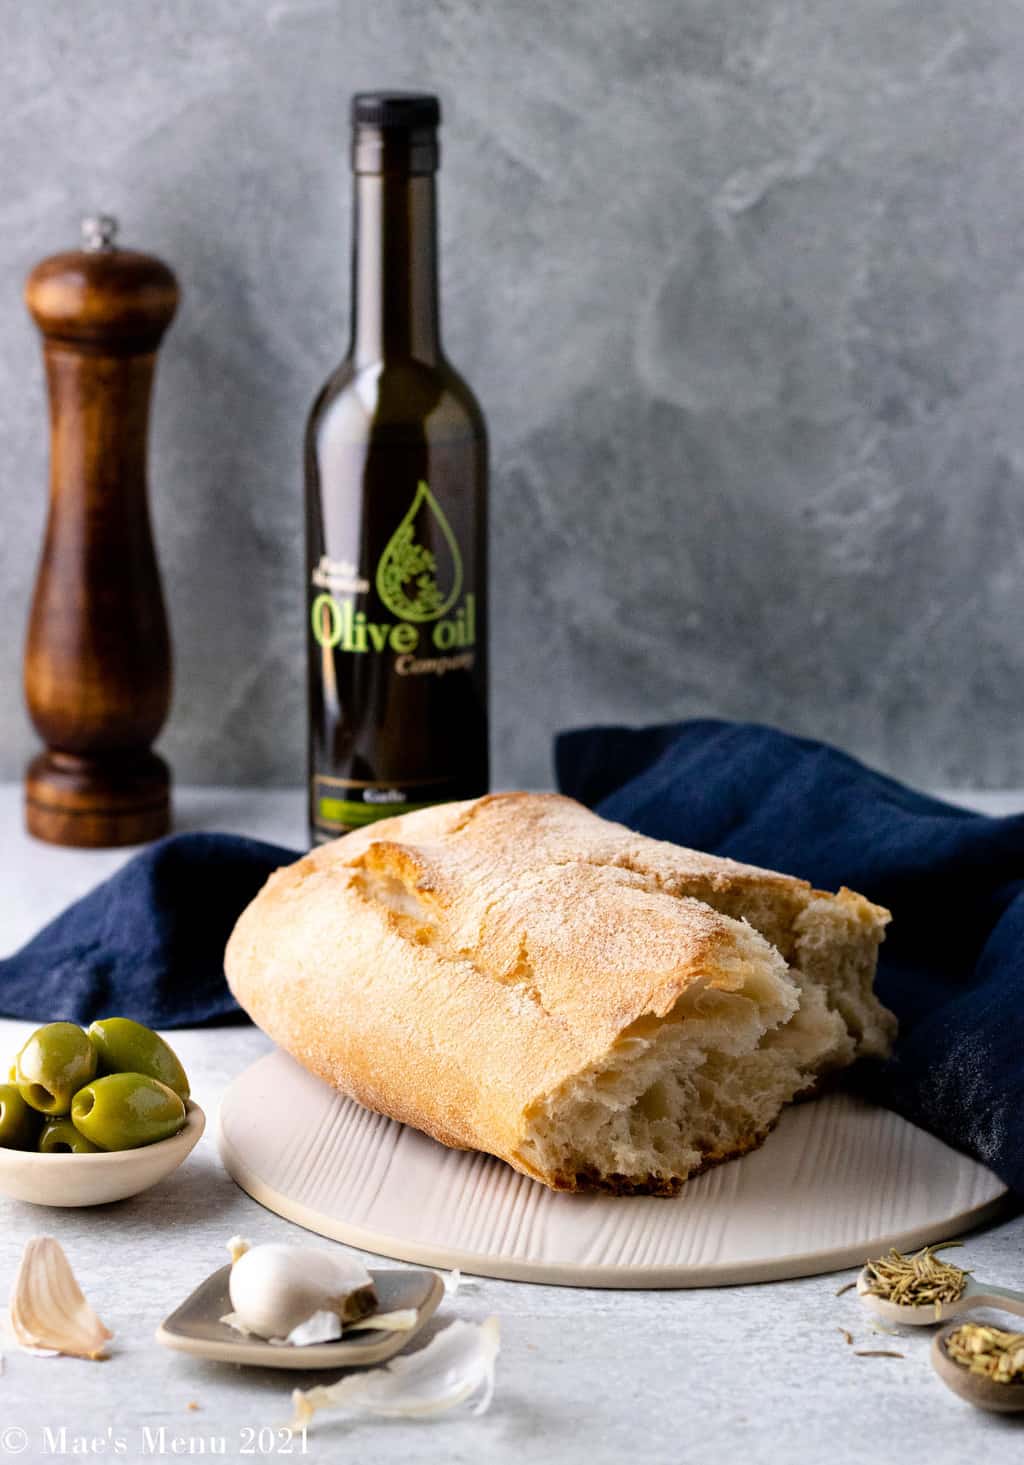 A torn loaf of ciabatta bread with a bottle of olive oil, olives, and seasonings